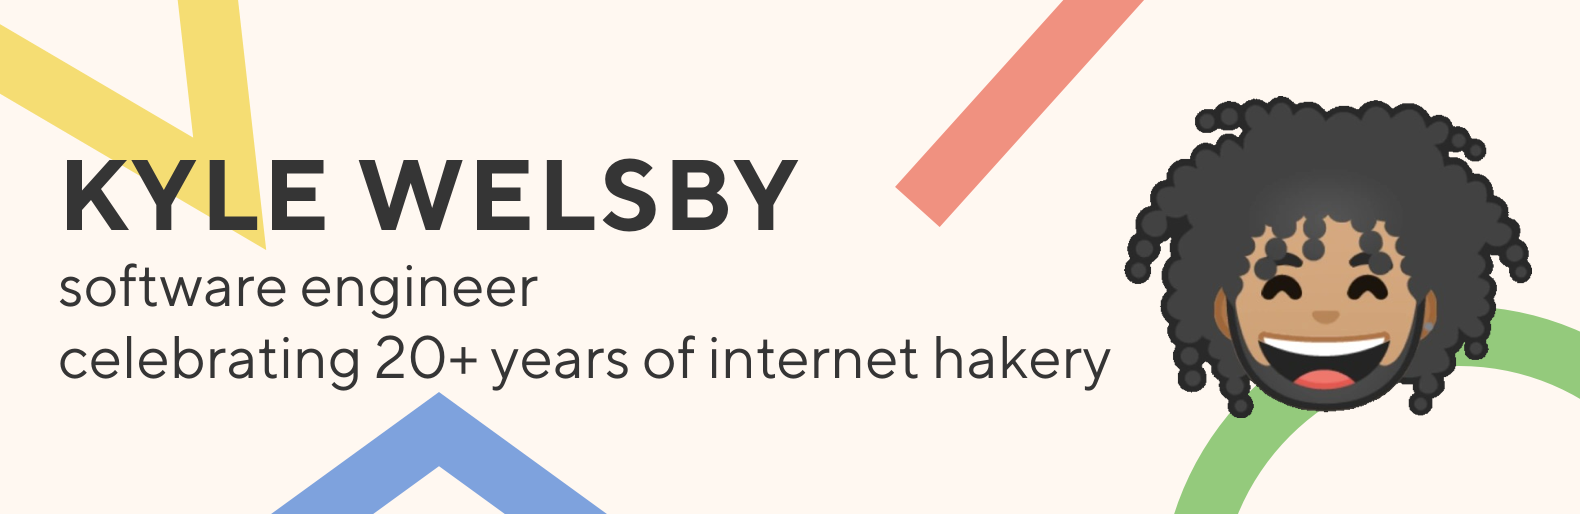 banner that says Kyle Welsby - software engineer, celebrating 20+ years of internet hakery alongside a cartoon emoji face illustration of Kyle